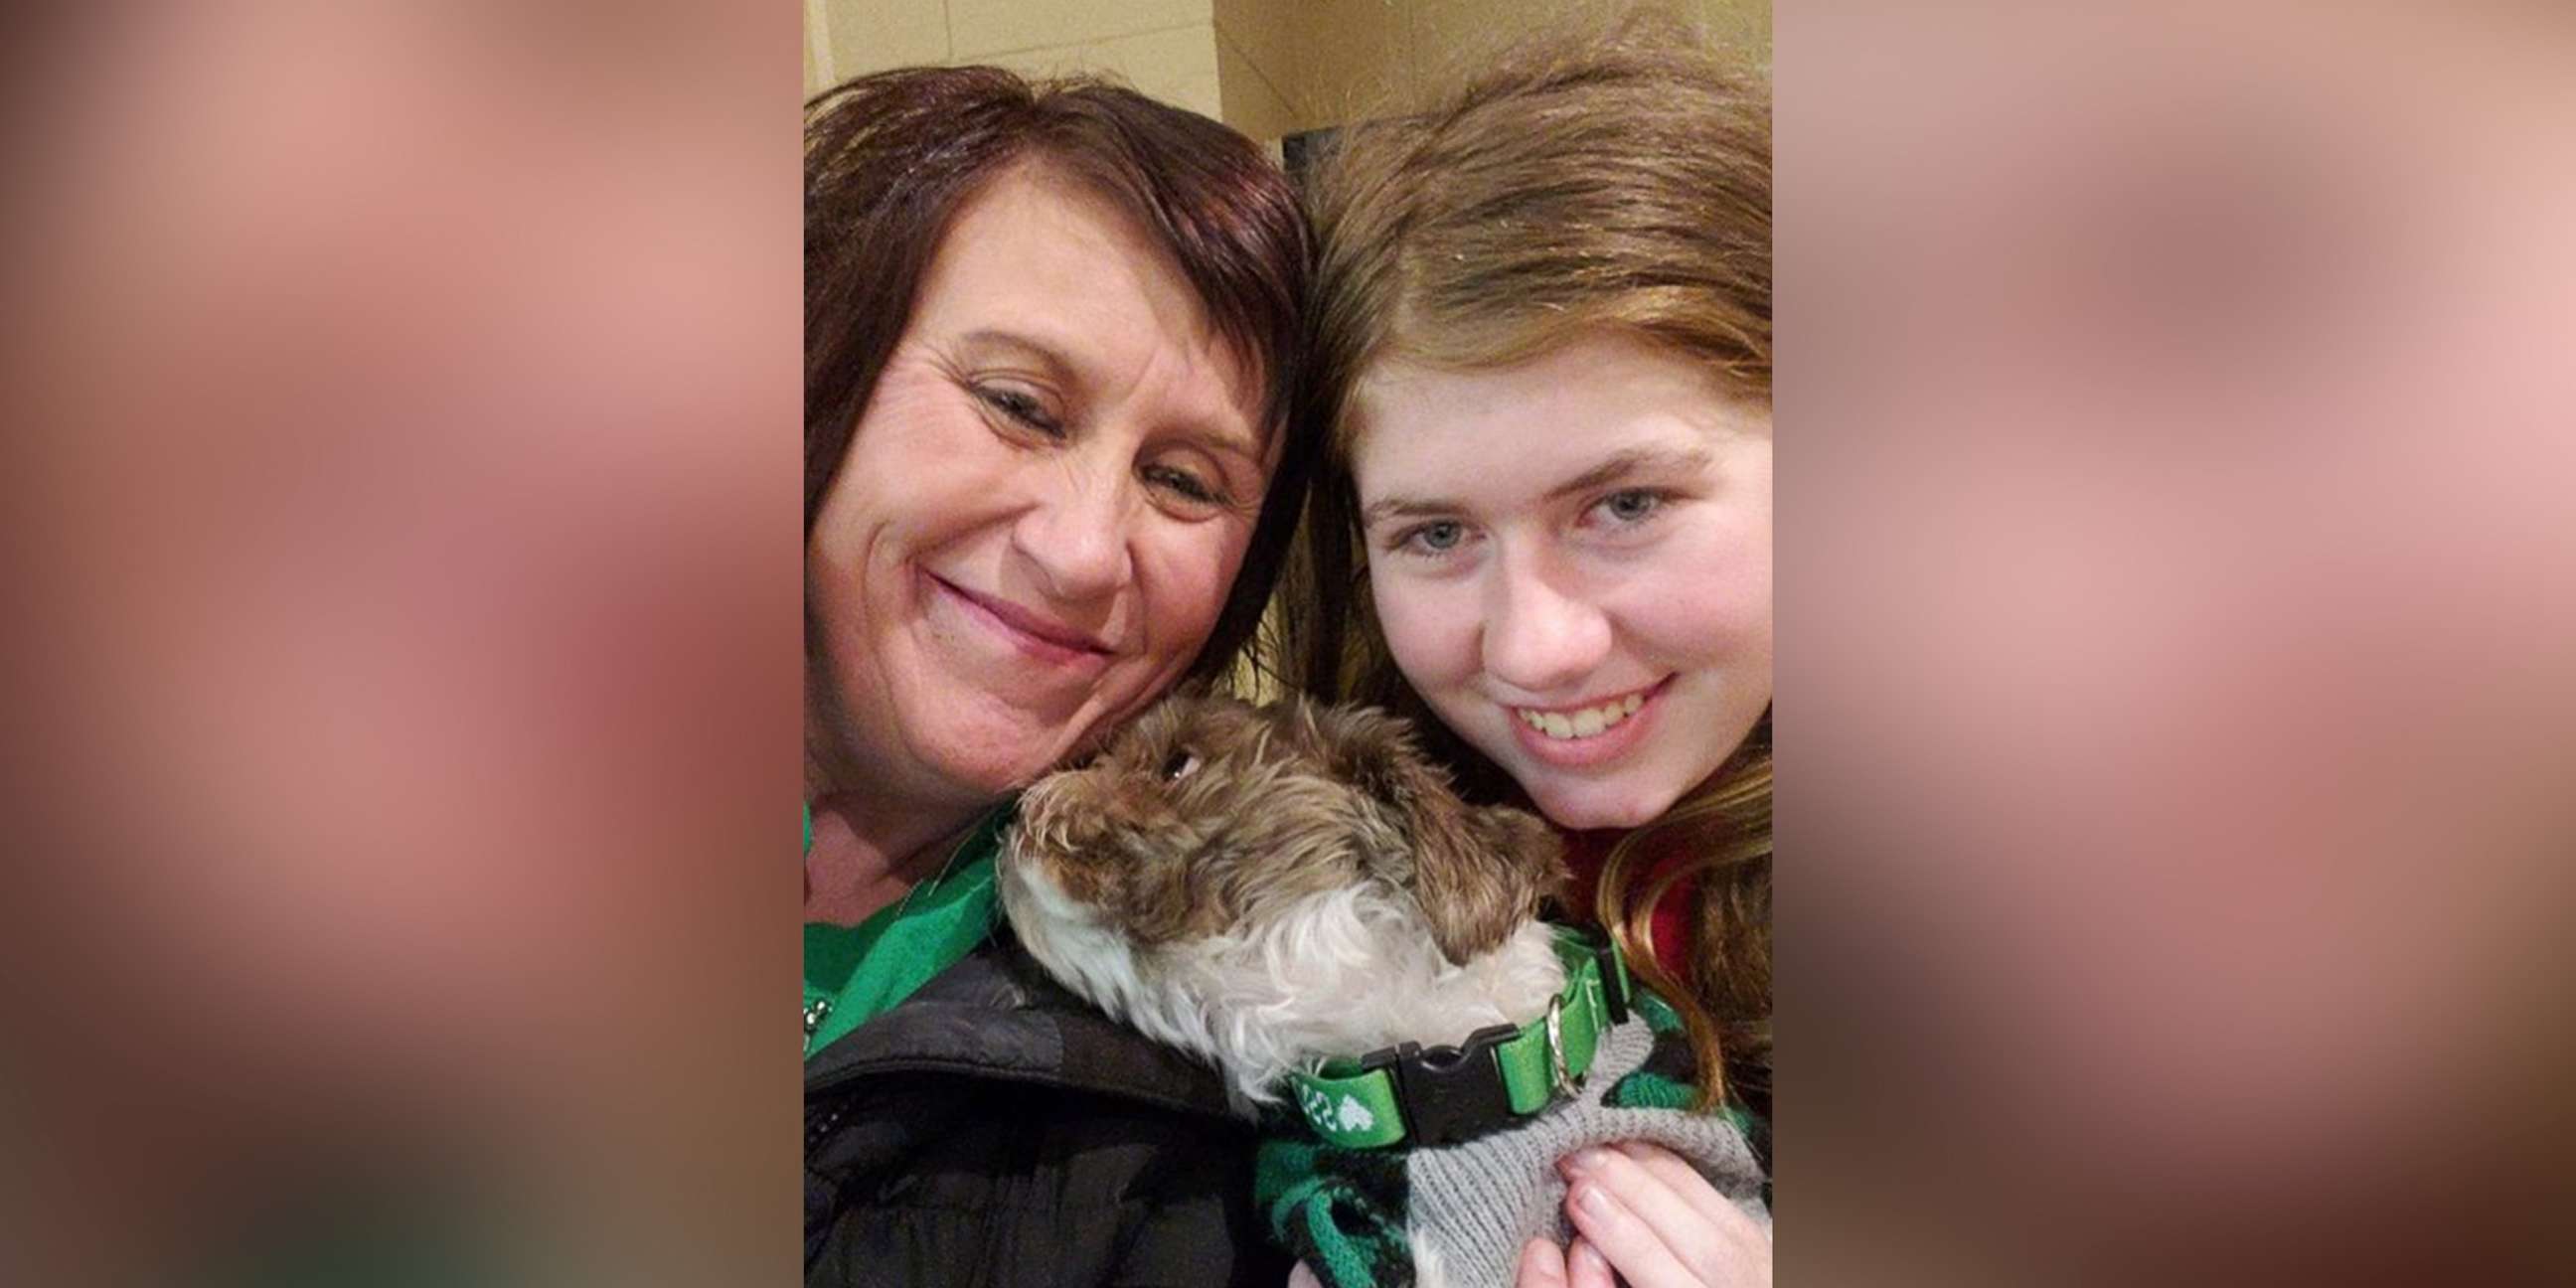 PHOTO: Jayme Closs, 13, is pictured in a photo shared on social media after reuniting with her aunt and godmother, Jennifer Smith, Jan. 11, 2019.